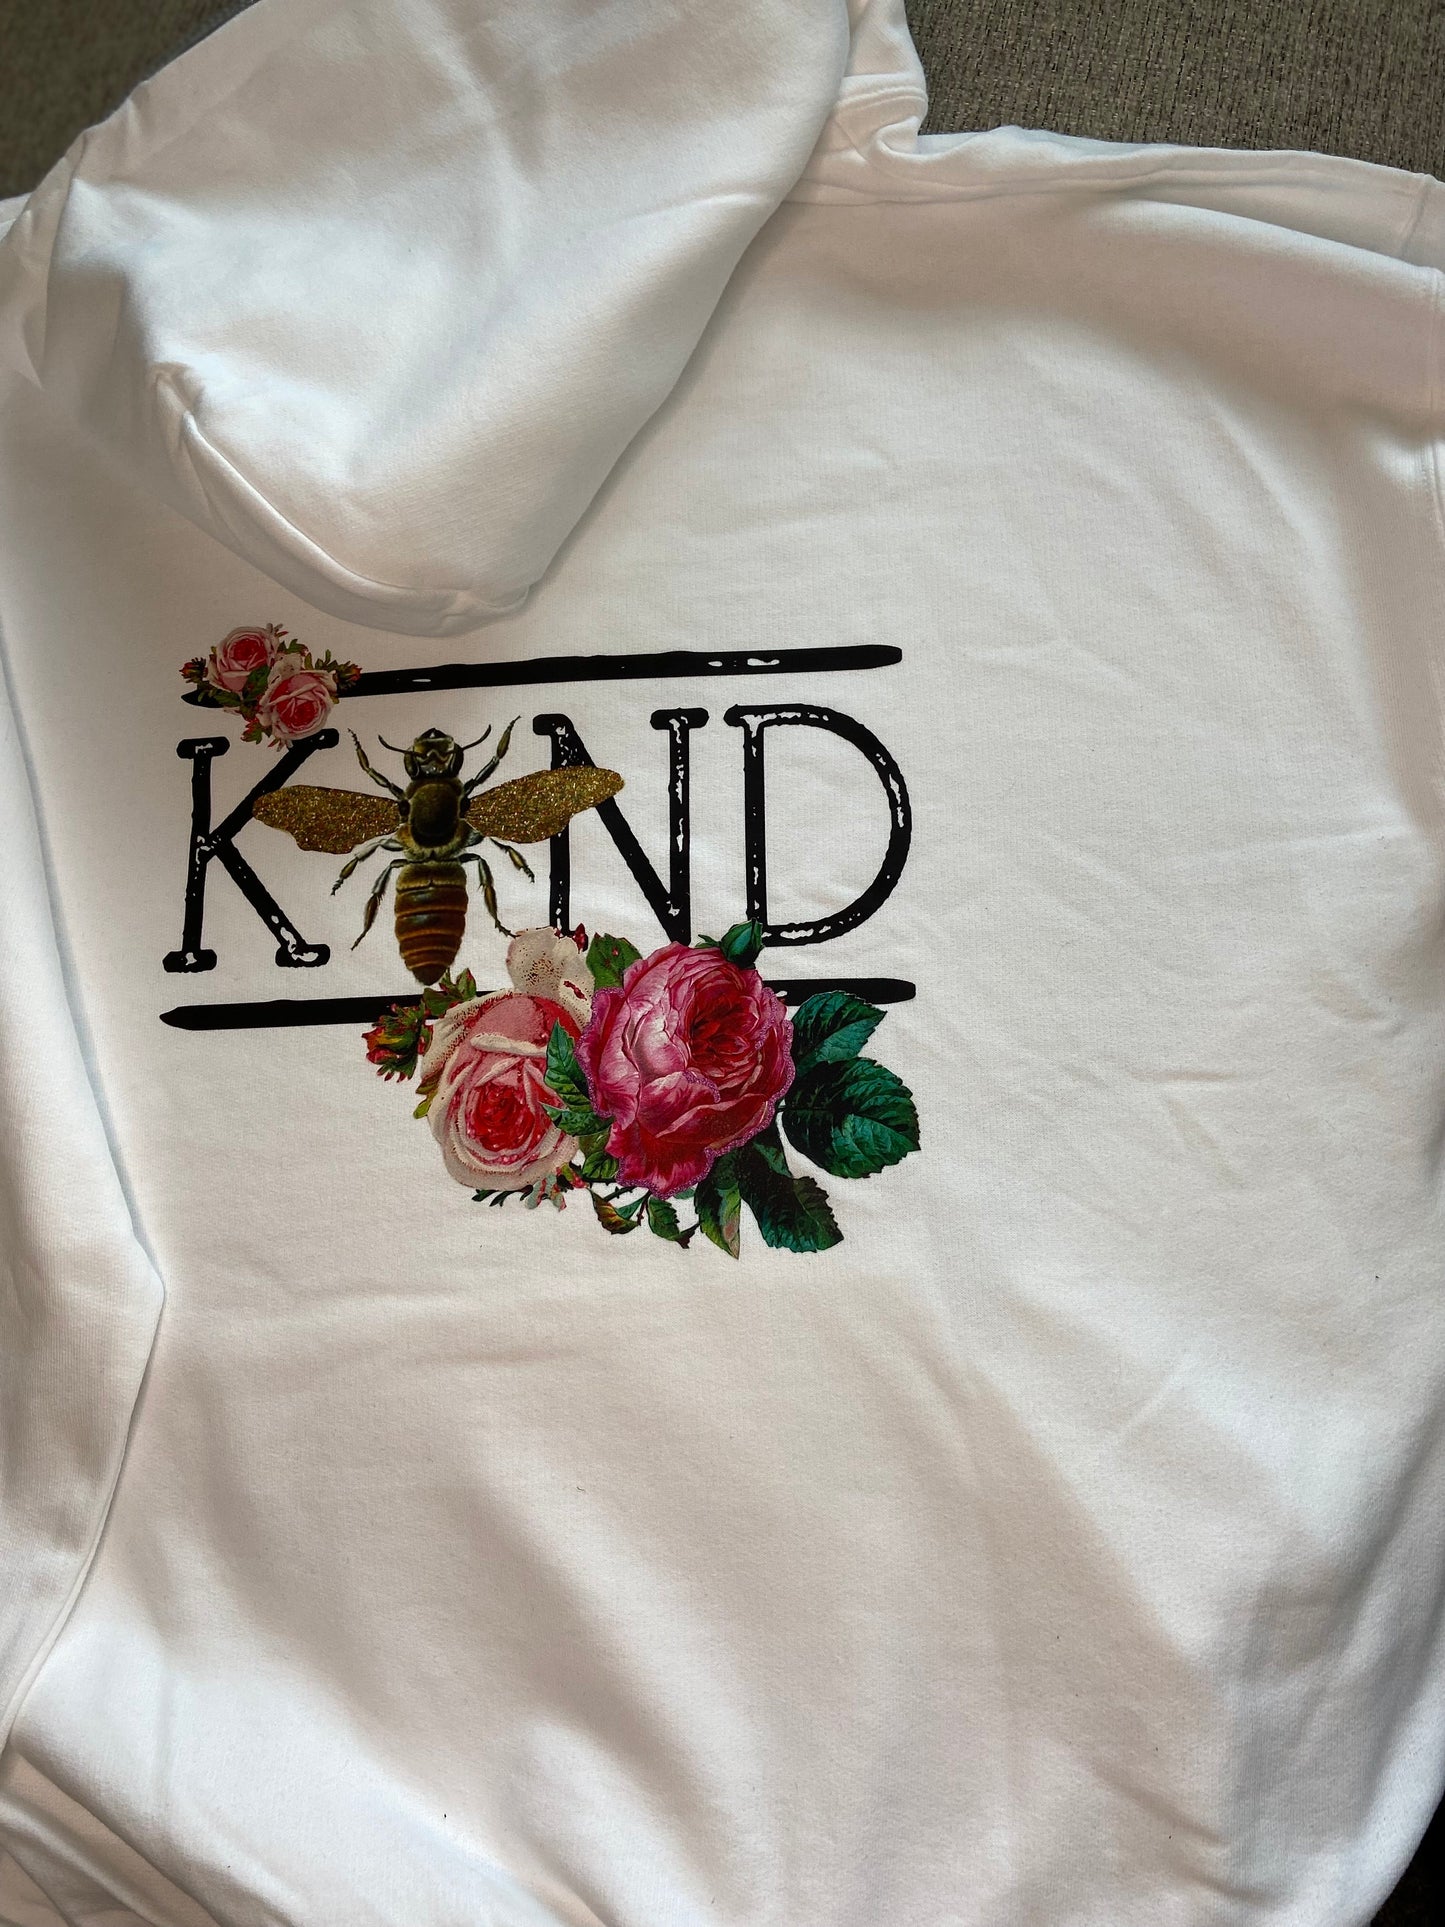 Bee Kind Shirt, Crew or Hoodie, front and back printed gift shirt, Trendy Graphic Hoodie, cottagecore Shirt